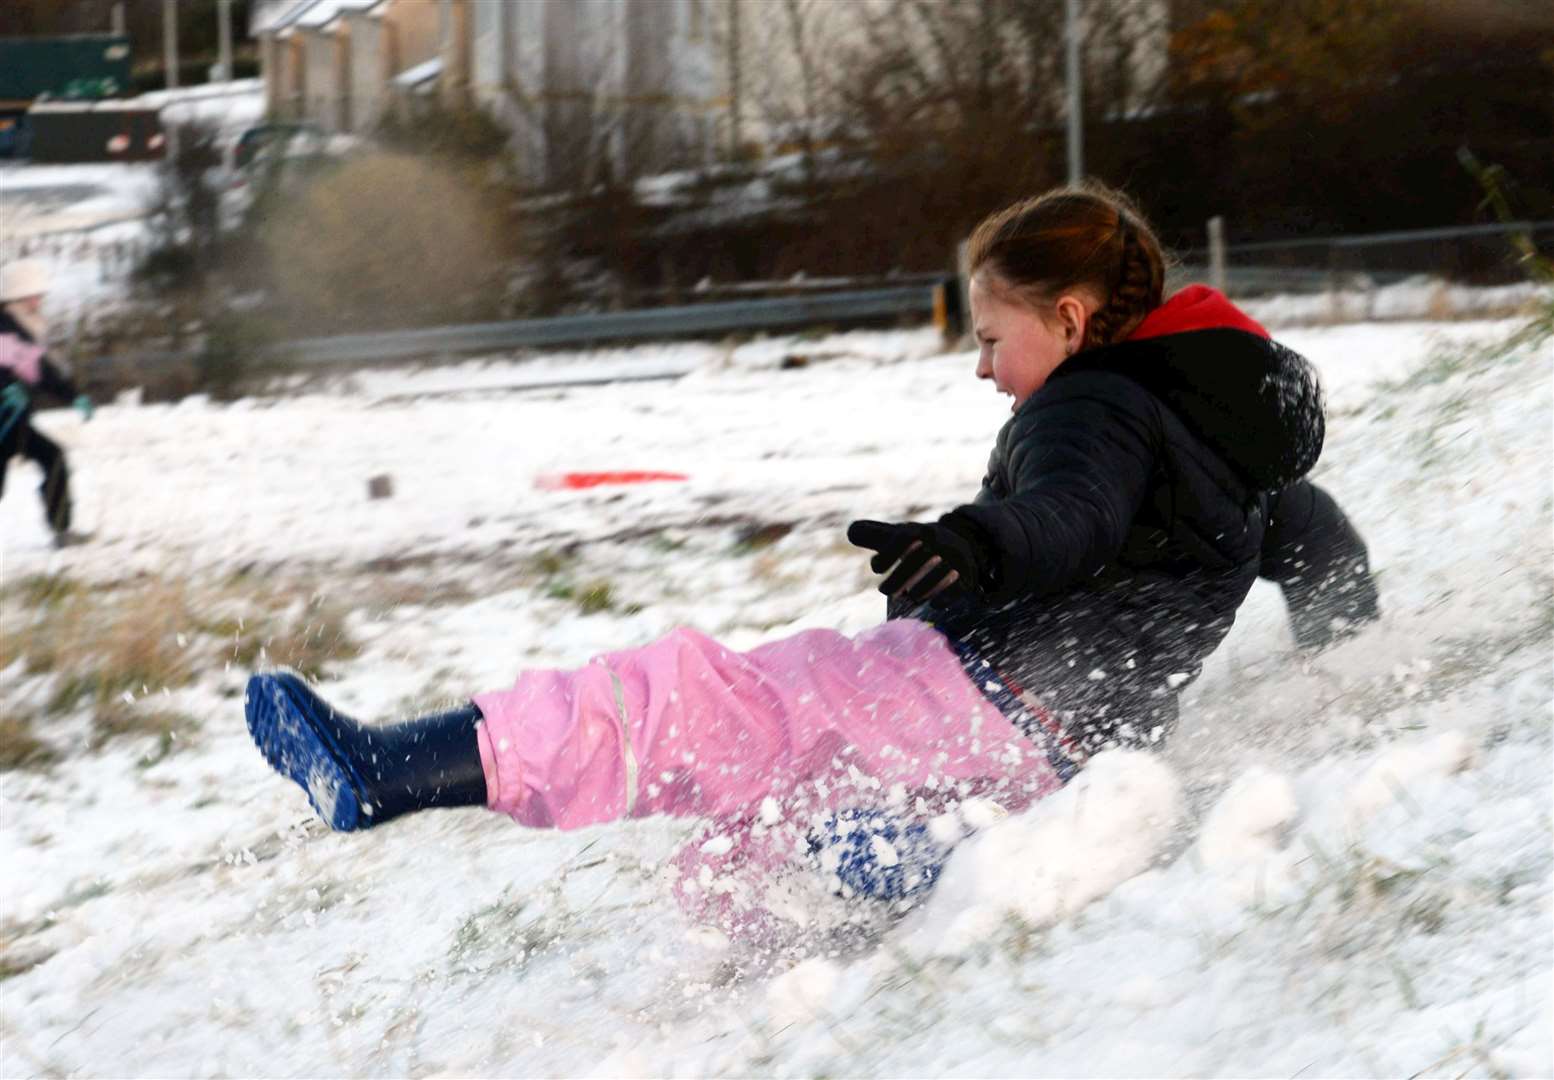 Mirabelle Tremarco didn't even need a sledge to slide in the snow. Picture: James Mackenzie